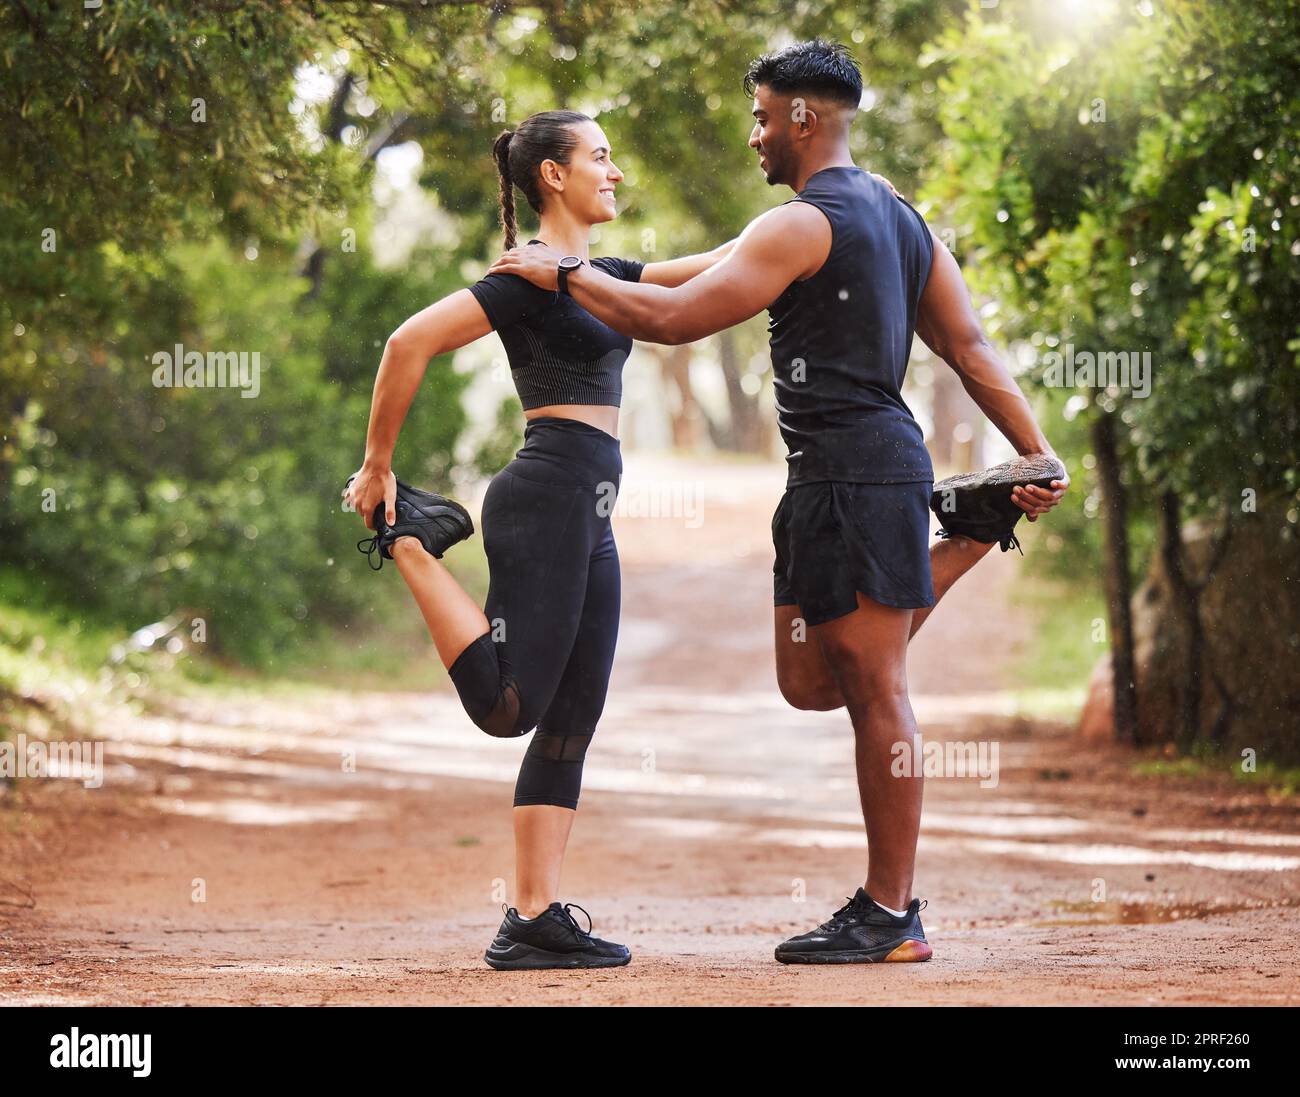 Young fit couple exercising outdoors together, bonding while stretching and preparing for a cardio workout. Athletic girlfriend and boyfriend being affectionate while training and staying healthy Stock Photo